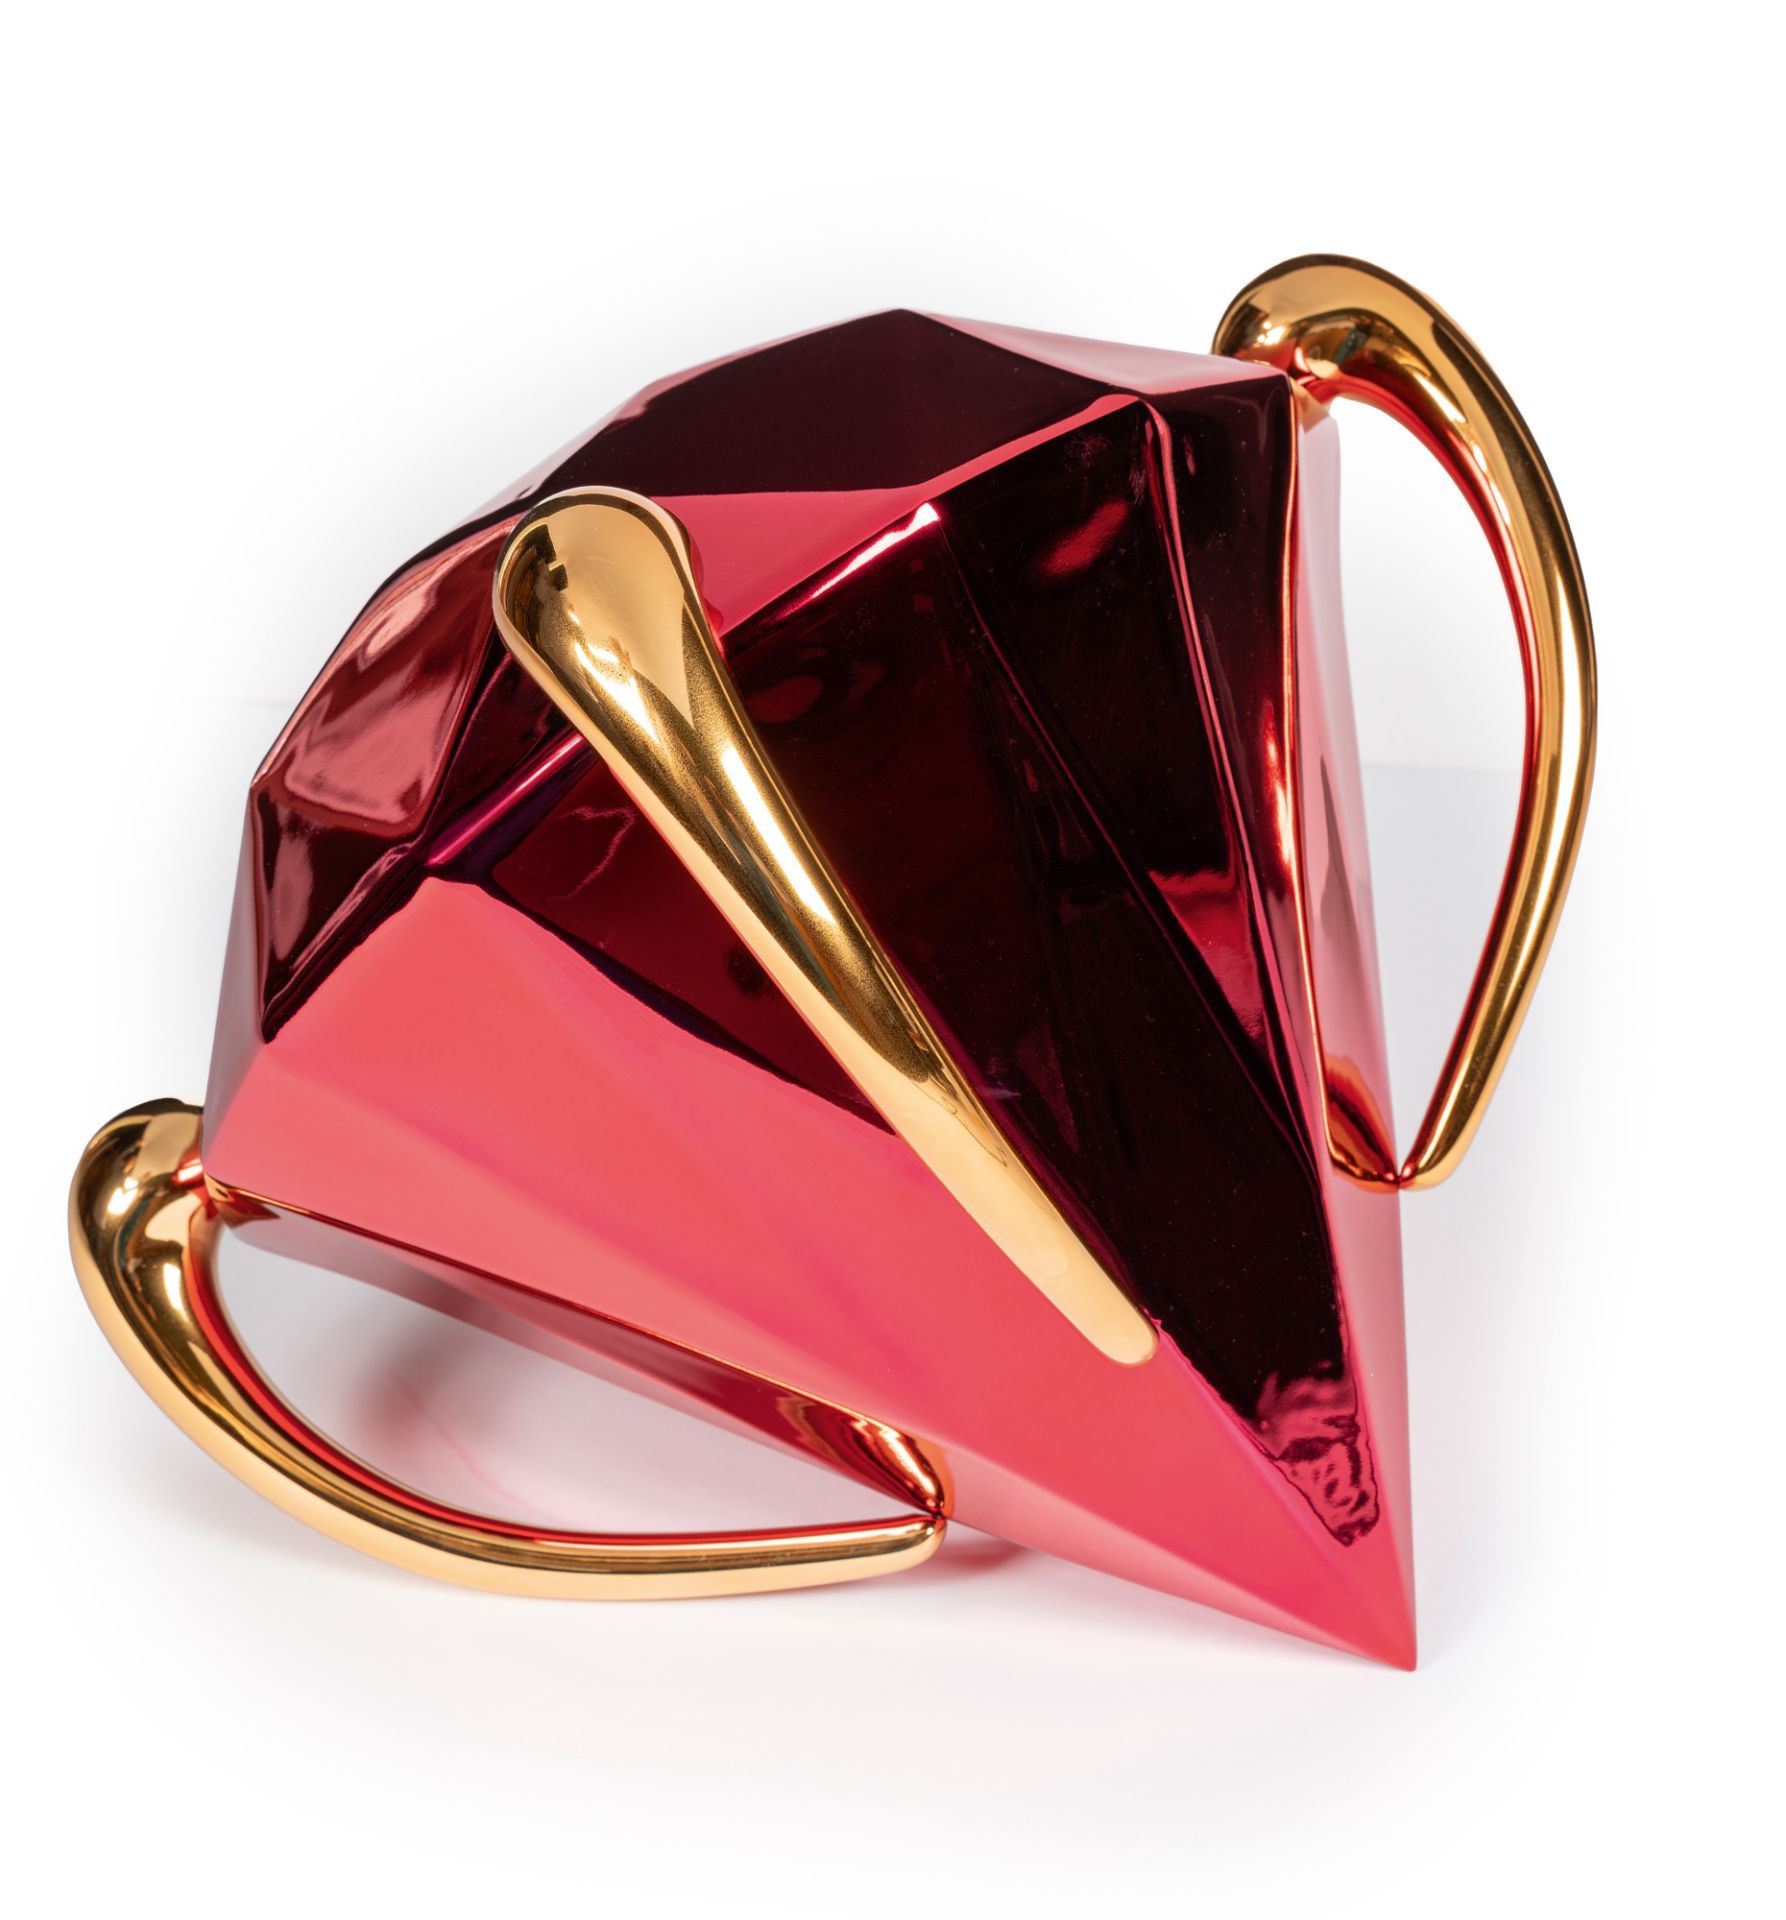 Jeff Koons, Diamond (red).Porcelain with chromatic coating. (2020). Ca. 32.5 x 39 x 32 cm. A - Image 4 of 6